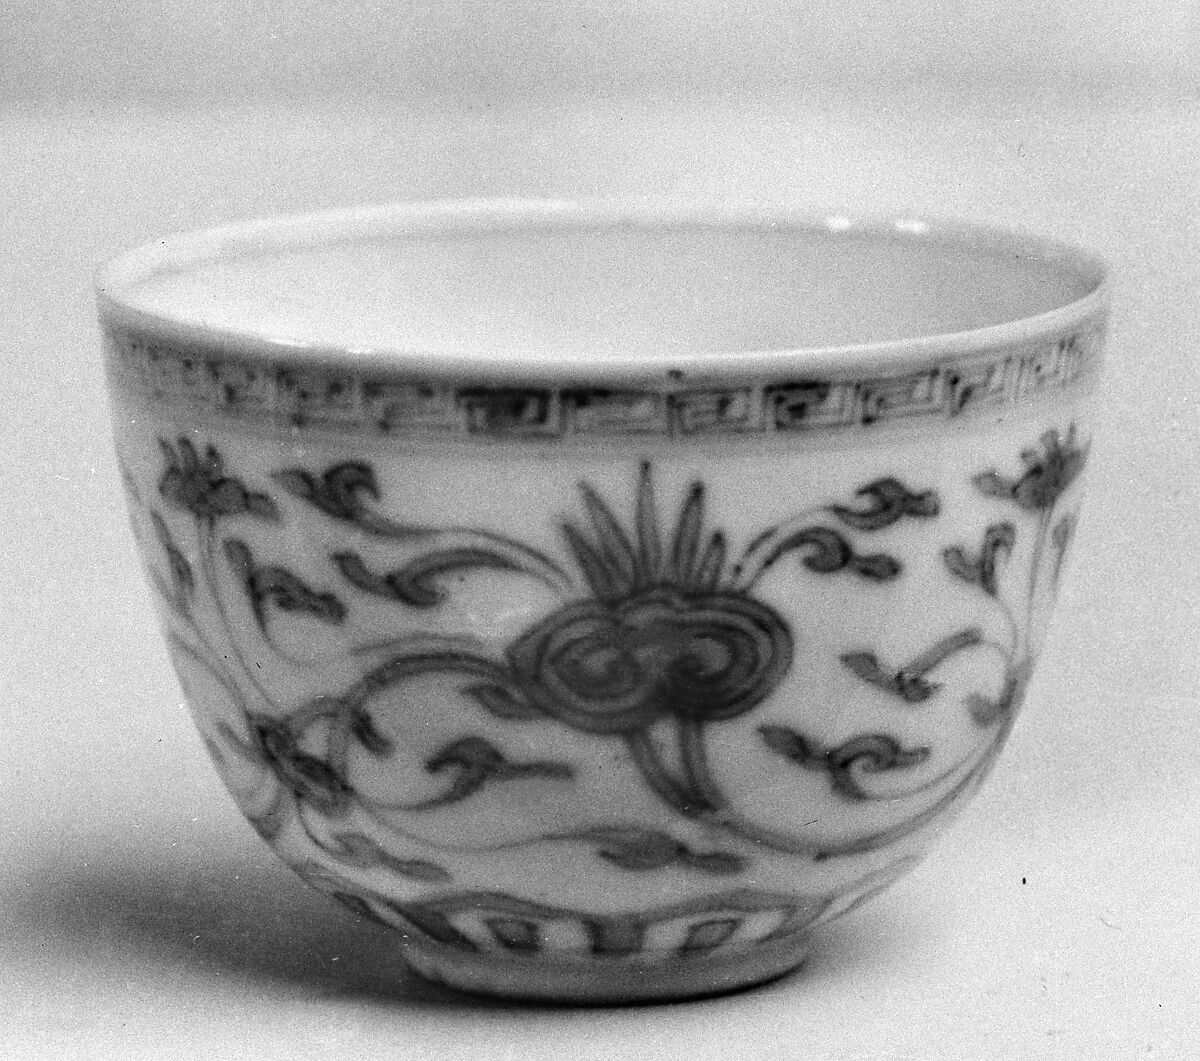 Cup with magic fungus (one of a pair), Porcelain painted in underglaze cobalt blue (Jingdezhen ware), China 